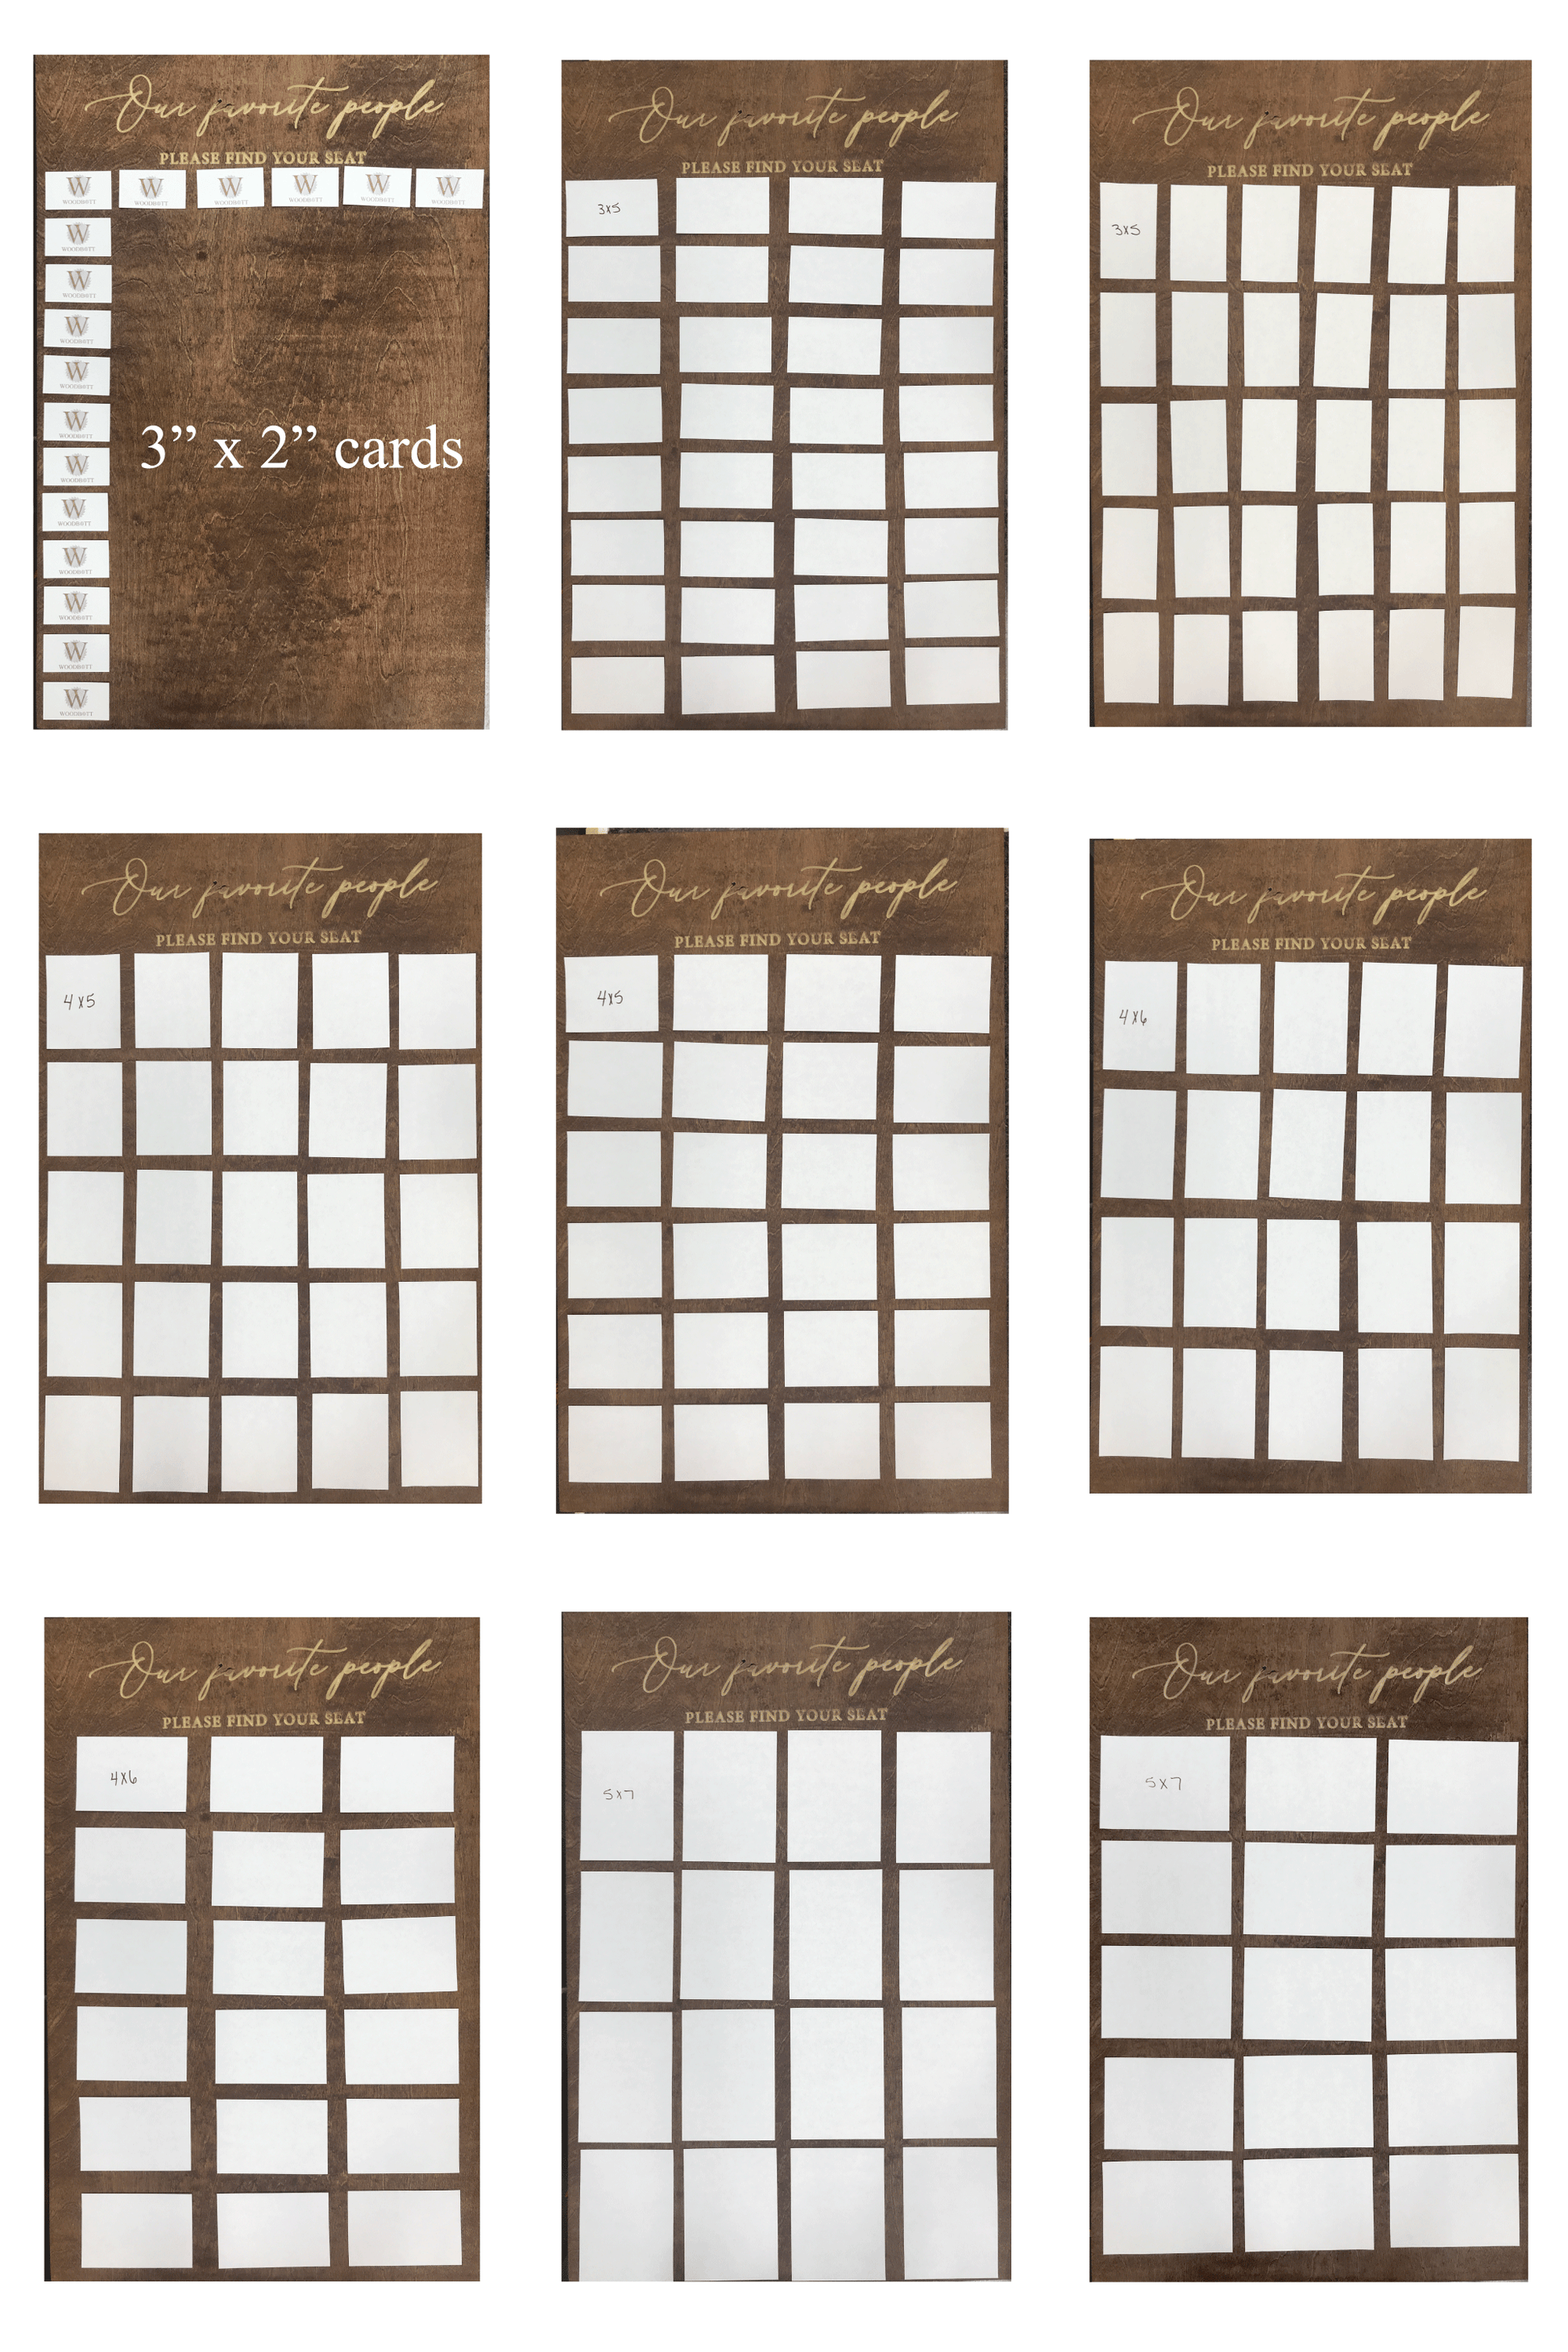 wedding seating chart place card display layouts